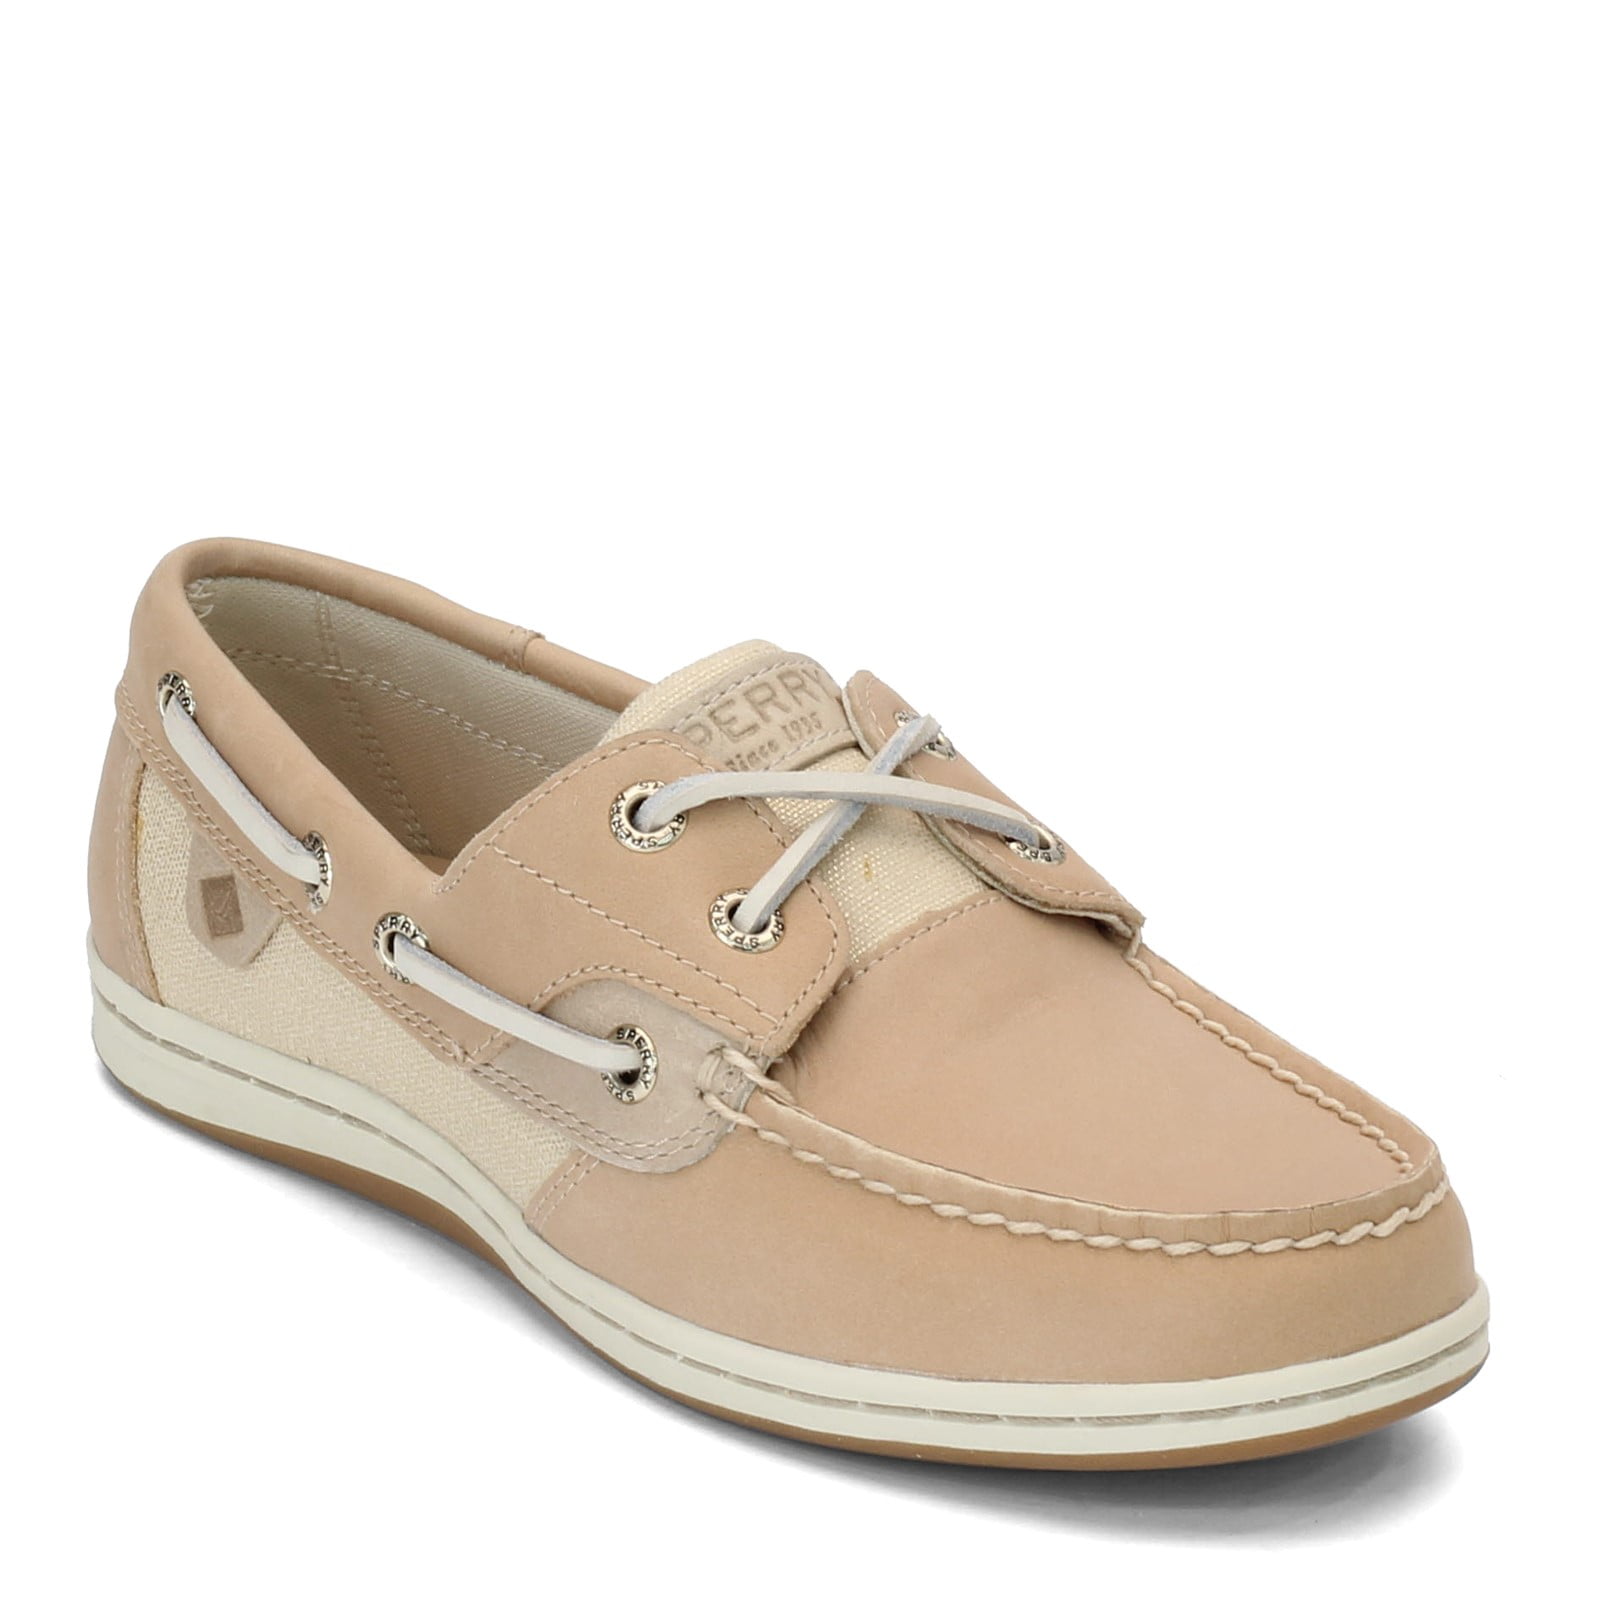 sperry koifish boat shoe